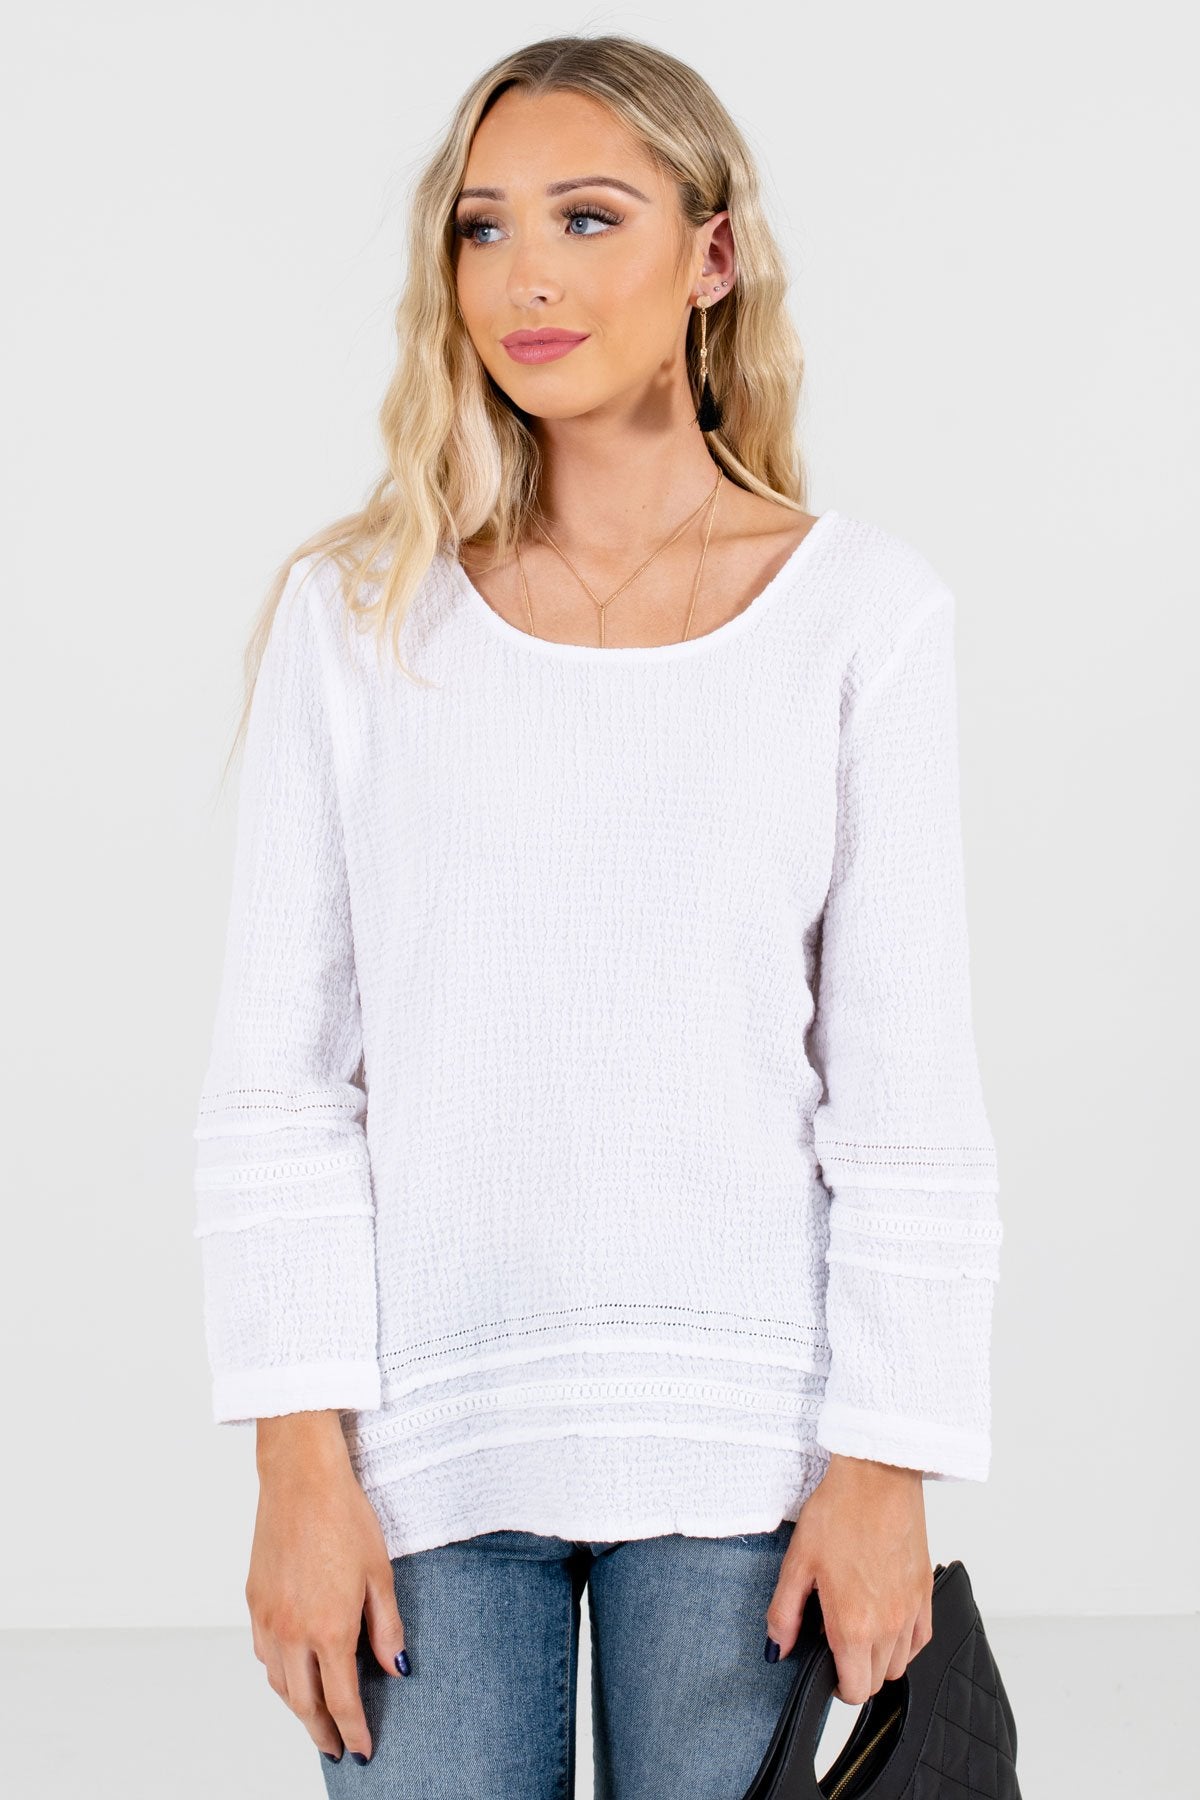 White High-Quality Textured Material Boutique Tops for Women